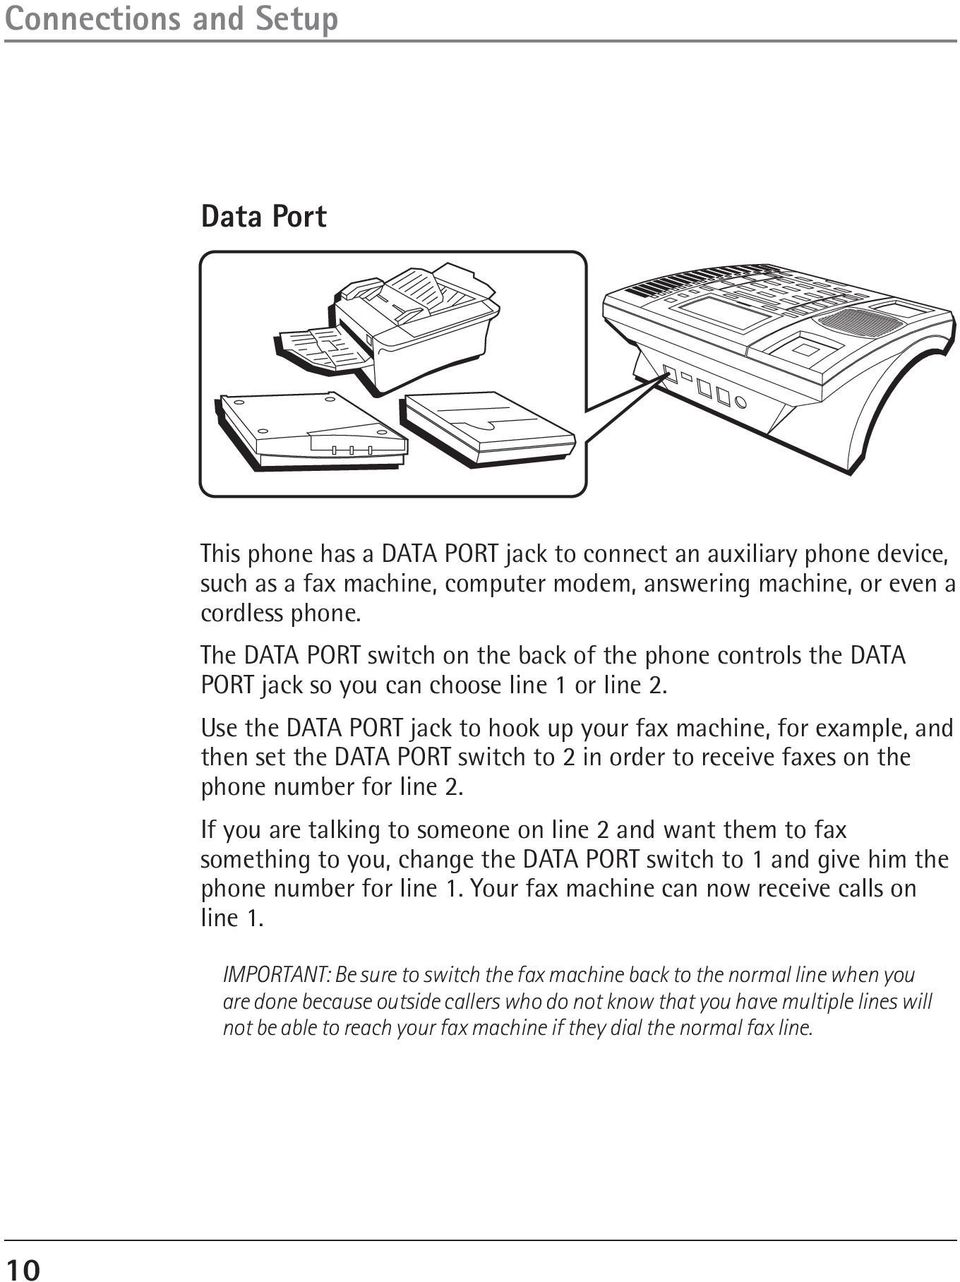 Use the DATA PORT jack to hook up your fax machine, for example, and then set the DATA PORT switch to 2 in order to receive faxes on the phone number for line 2.